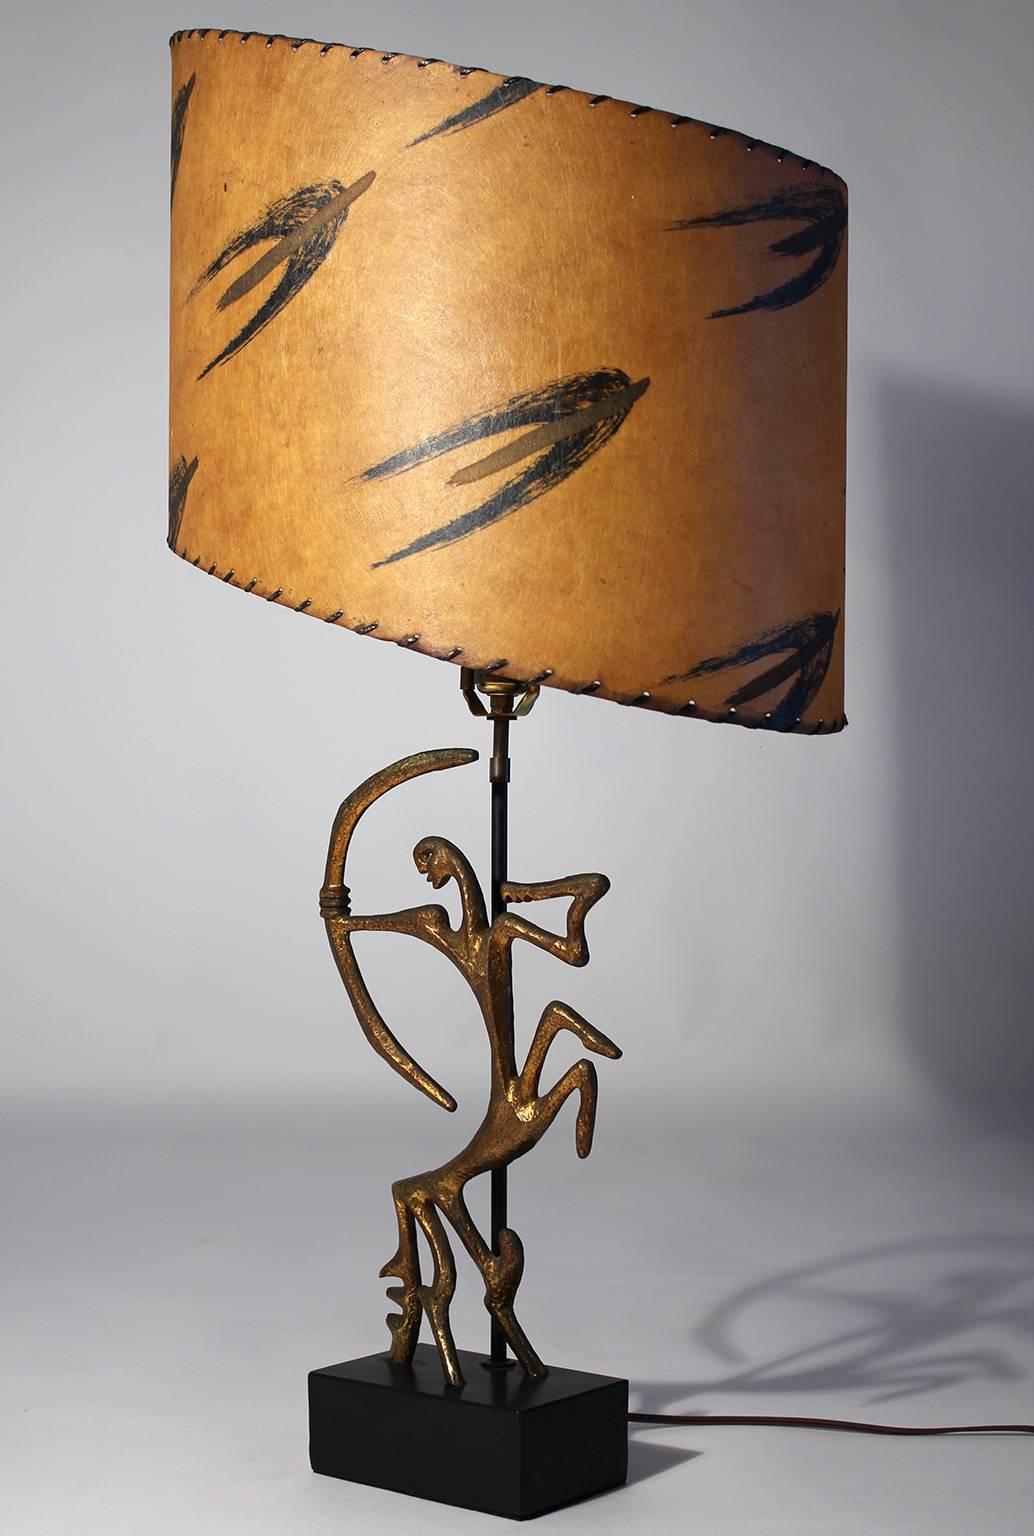 Rare vintage Frederick Weinberg lamp with unusual original shade and bronze Sagittarius sculptural figure.

Overall: 18